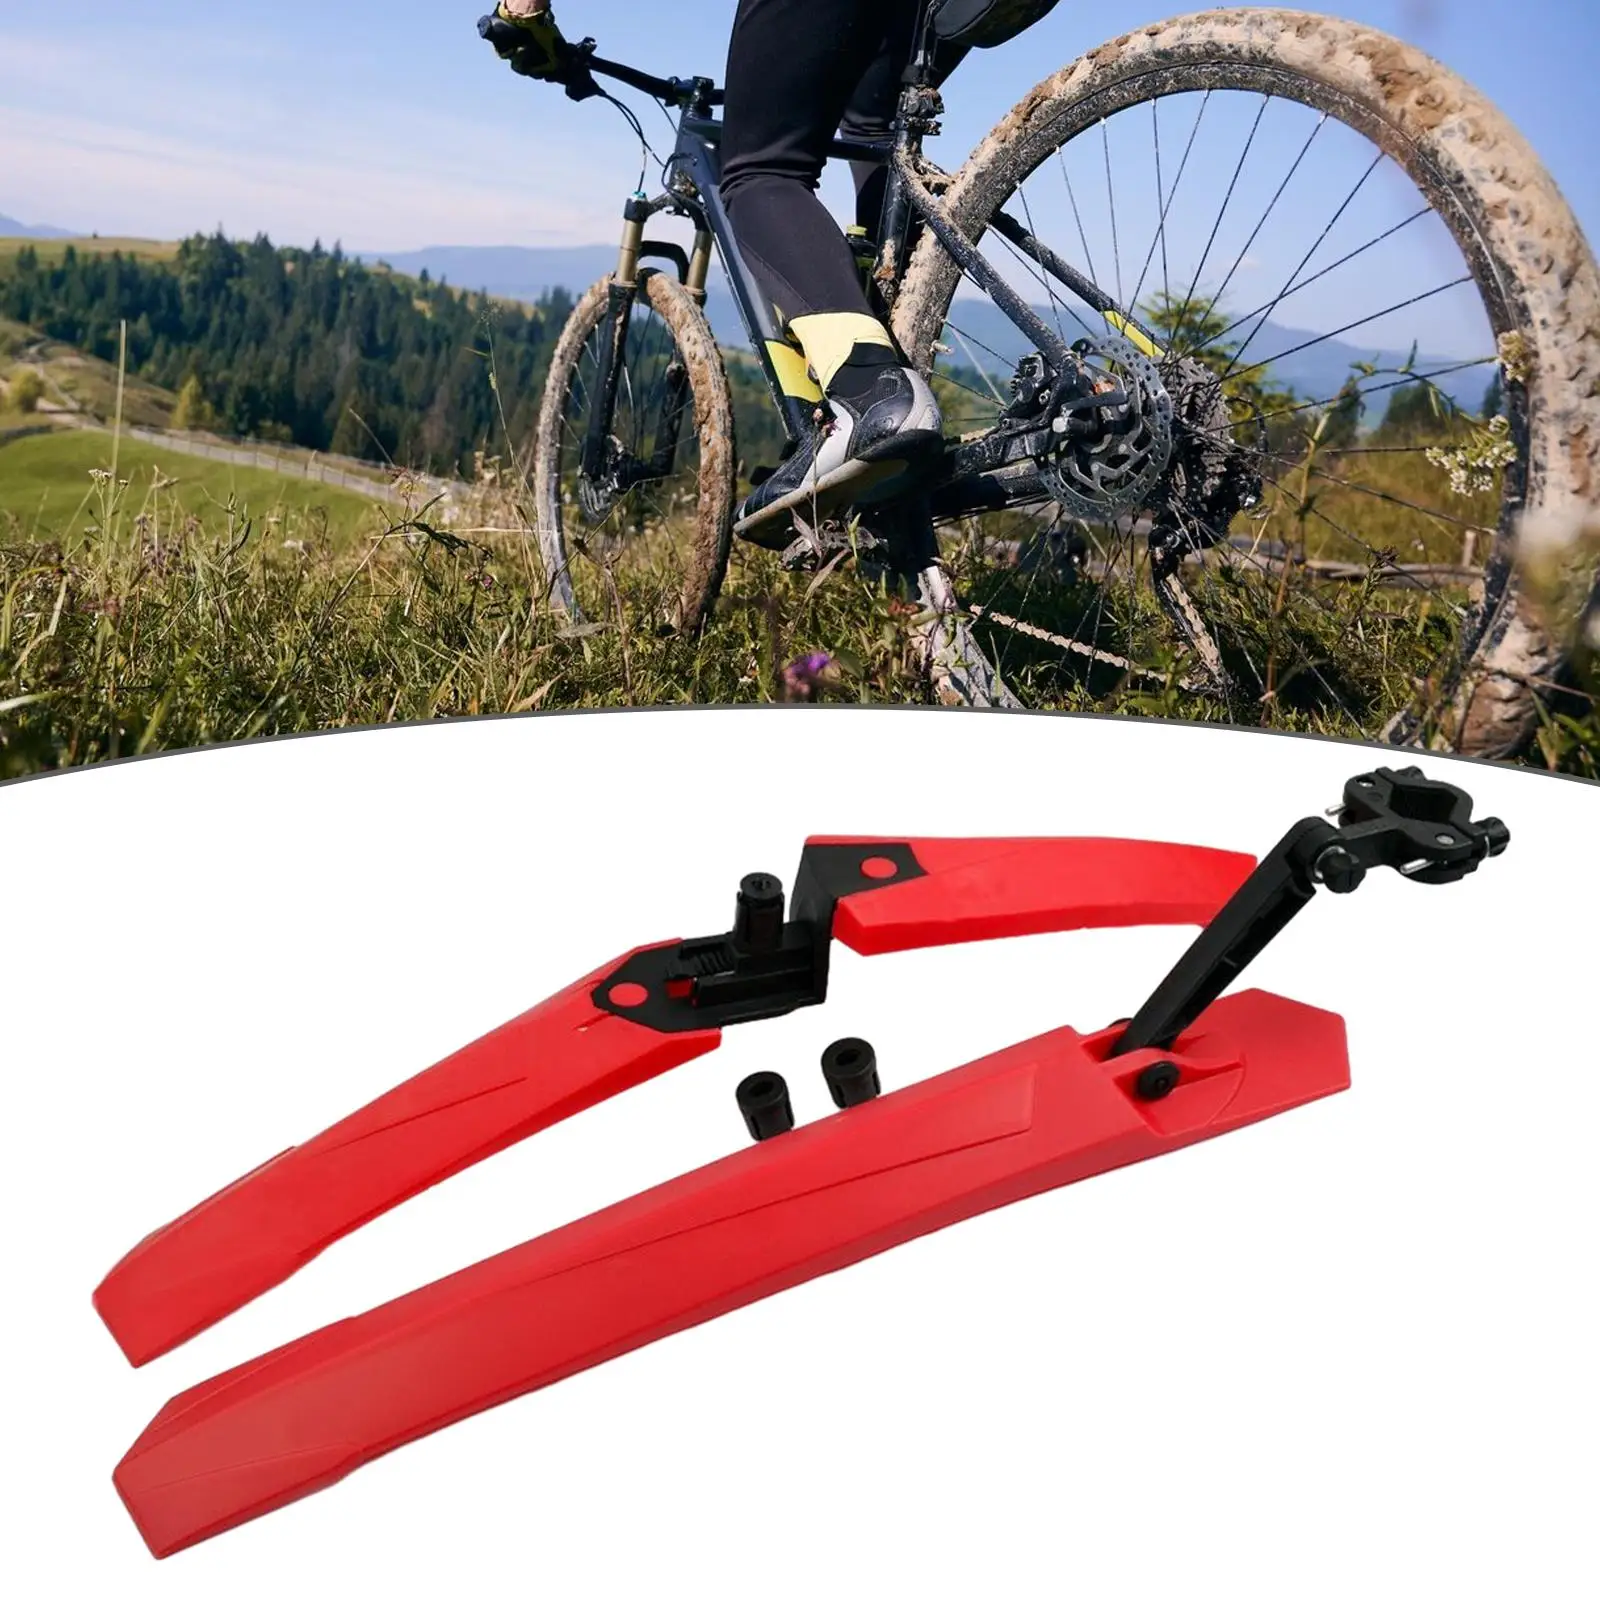 Bike Mudguard Front Rear Set Wheel Protector Practical Bike Front & Rear Fenders for Sports Cycling Outdoor Riding Components